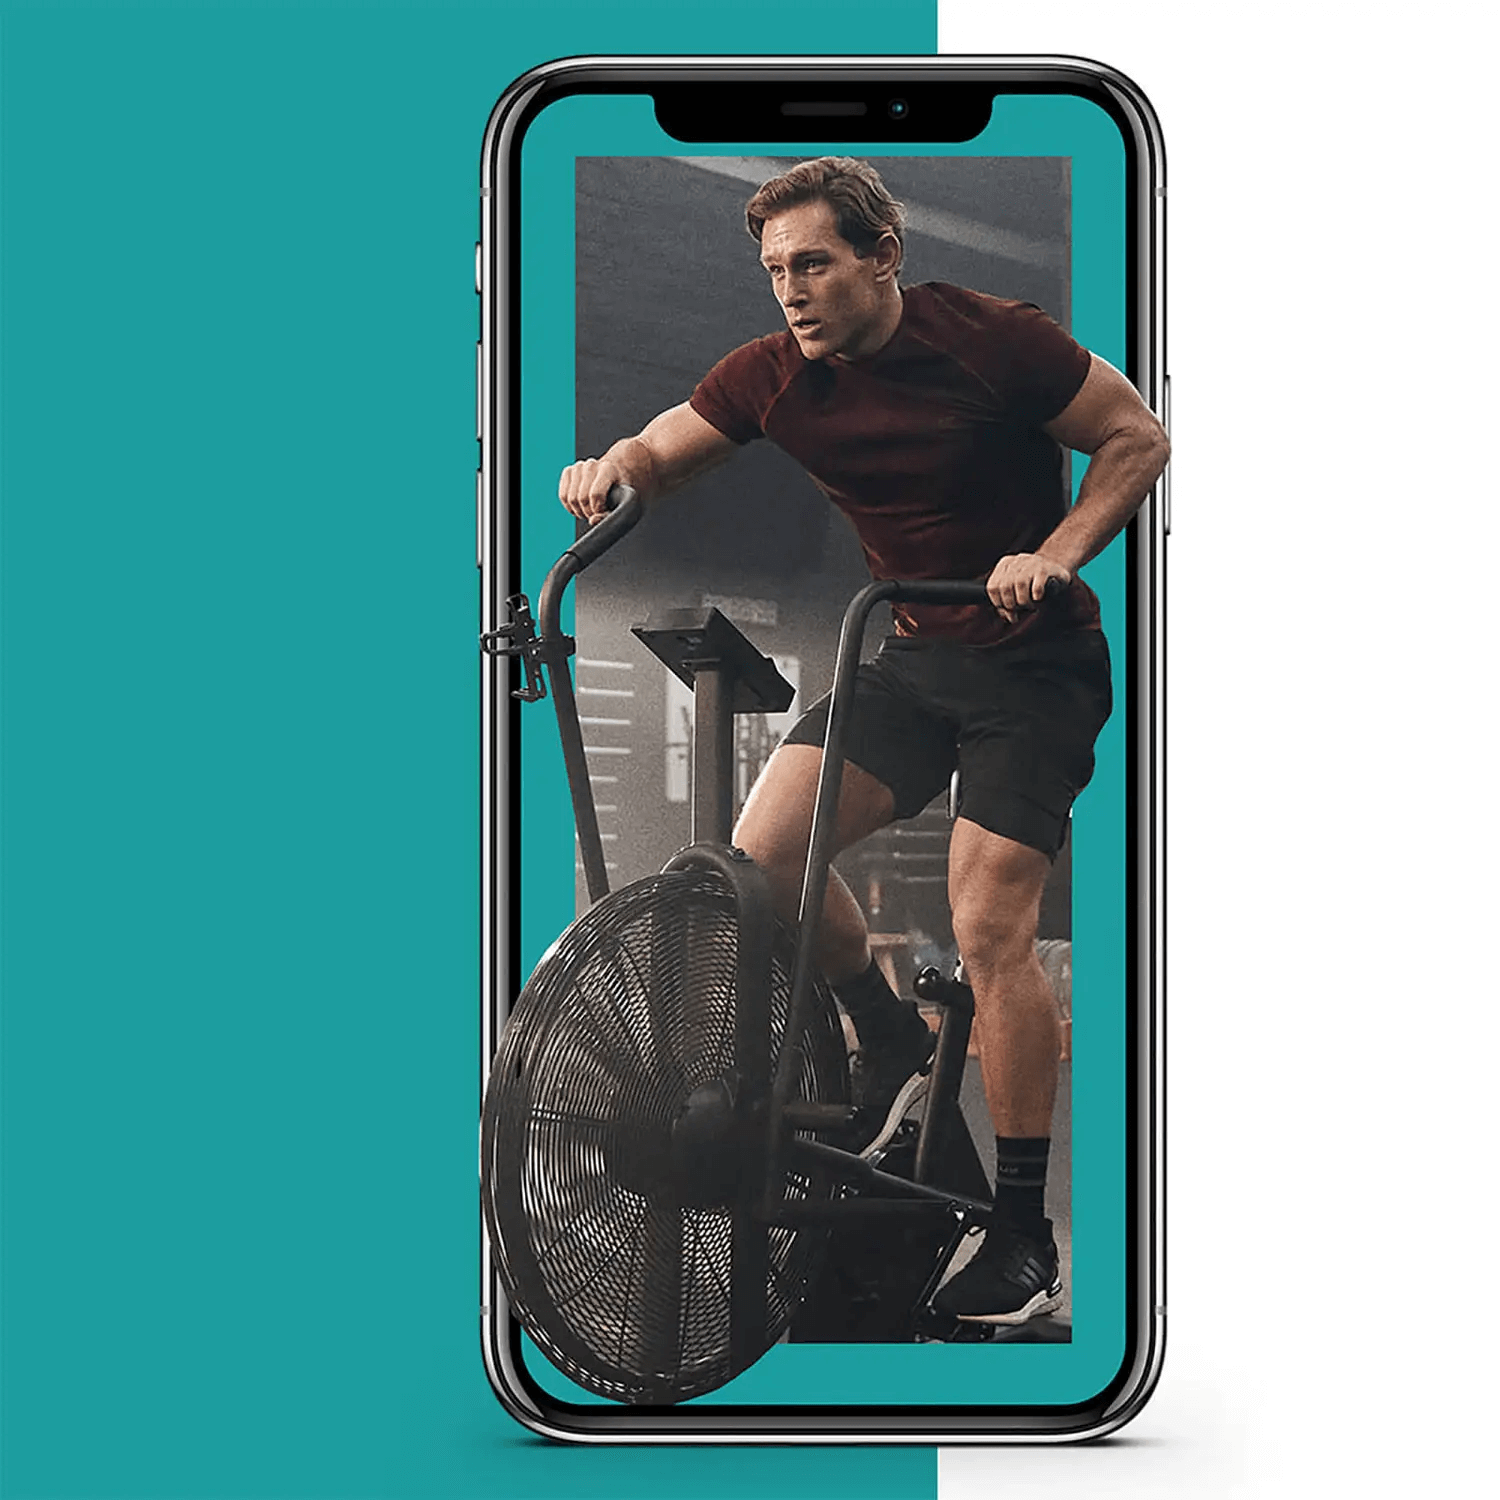 Graphic on a mobile phone of a man working out on a black assault bike in the gym.